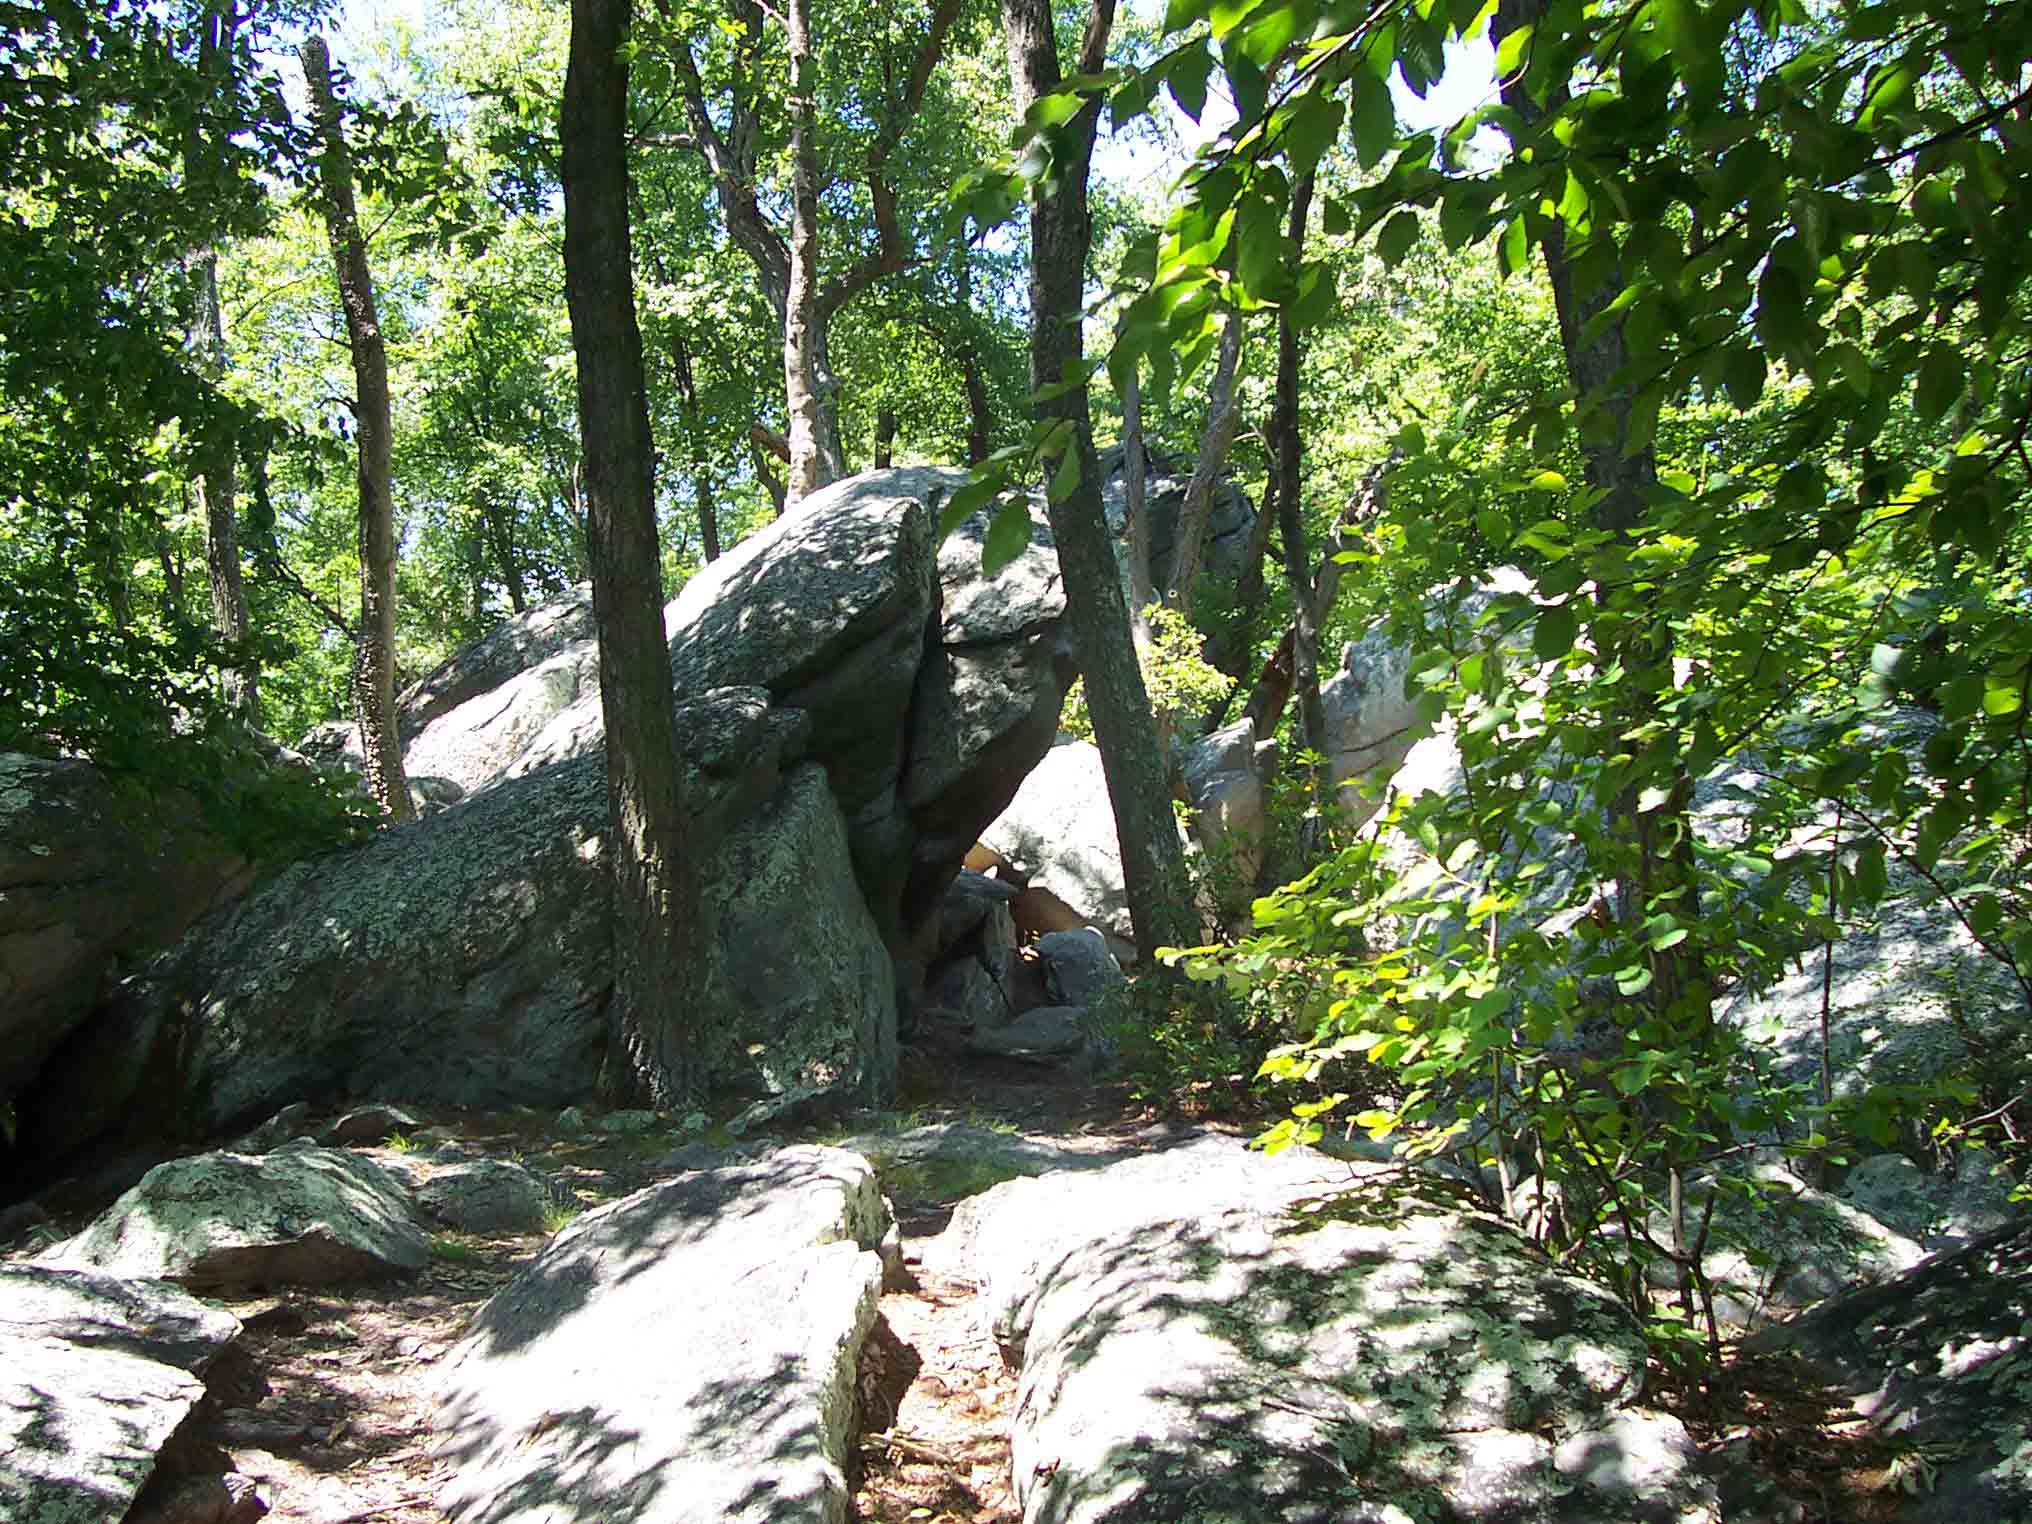 West (trail south) of Whiskey Springs Road the trail follows a rocky ridge. In many cases it goes around and through rock jumbles. Taken at approx. MM 6.3.  Courtesy dlcul@conncoll.edu